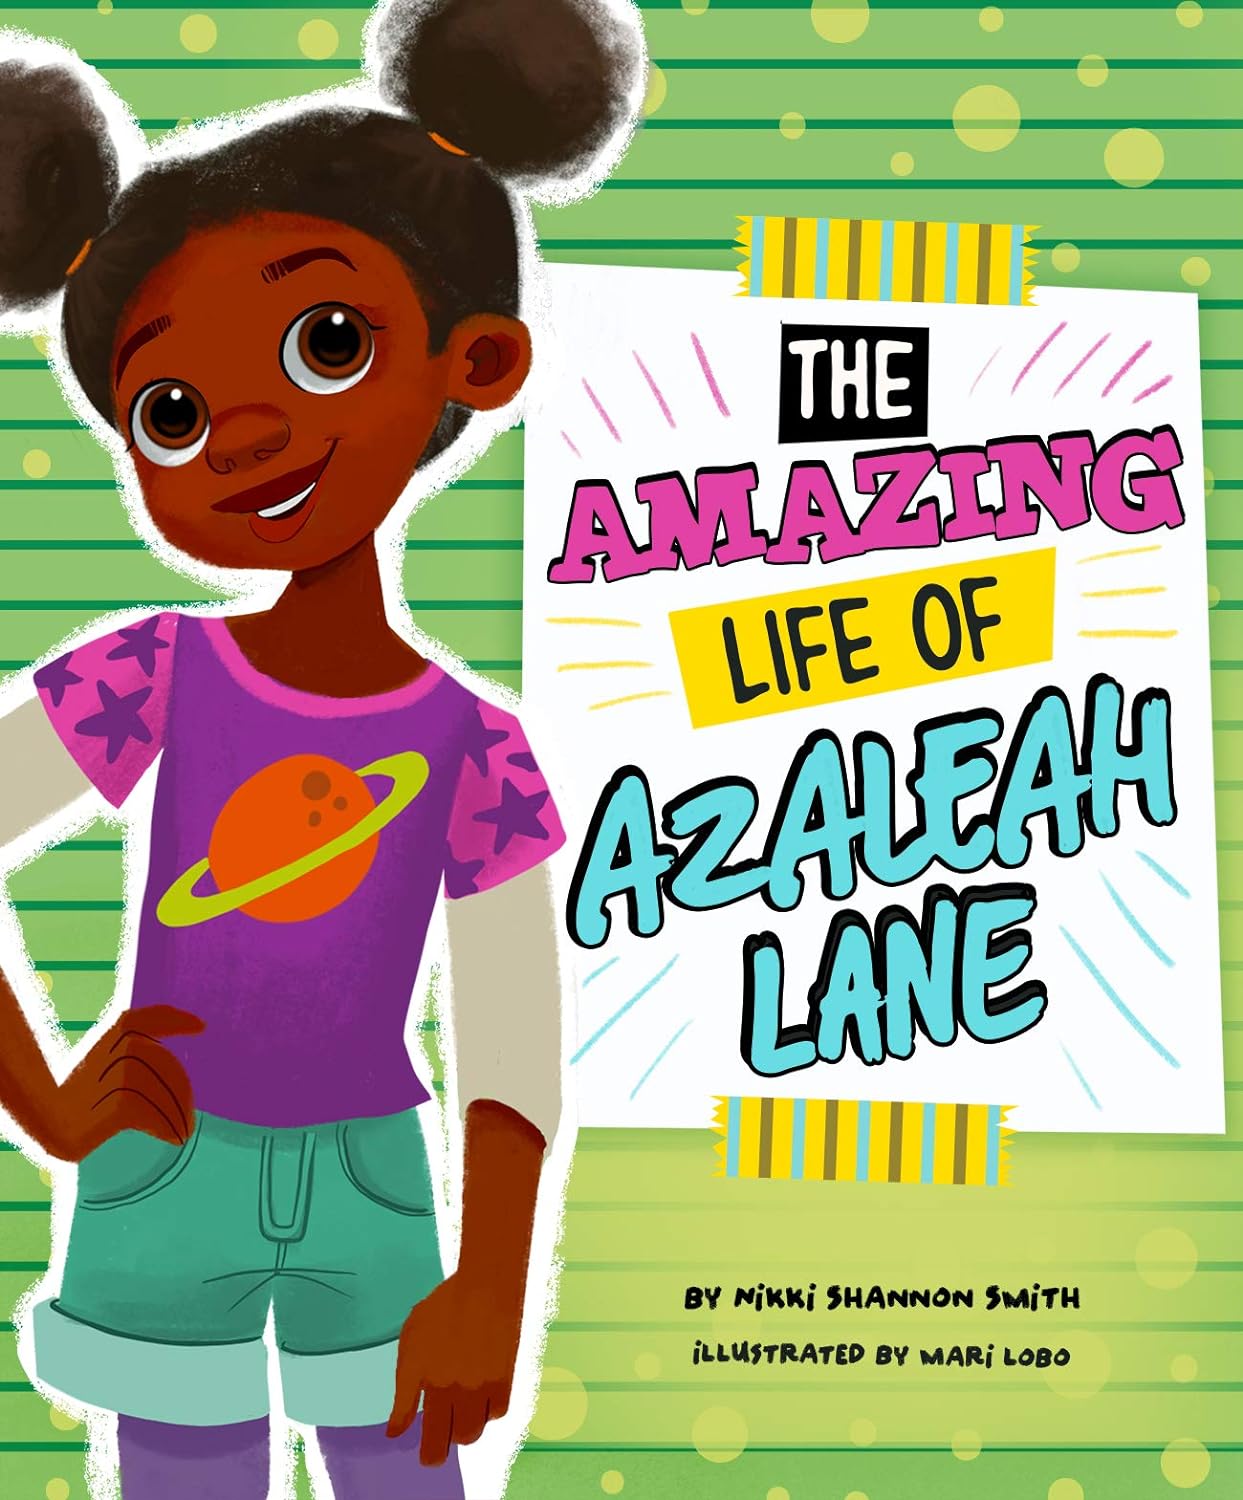 Cover of The Amazing Life of Azaleah Lane, showing a Black girl wearing a purple shirt with a planet on it and denim shorts standing to the left of the title of the book in eye-catching fonts